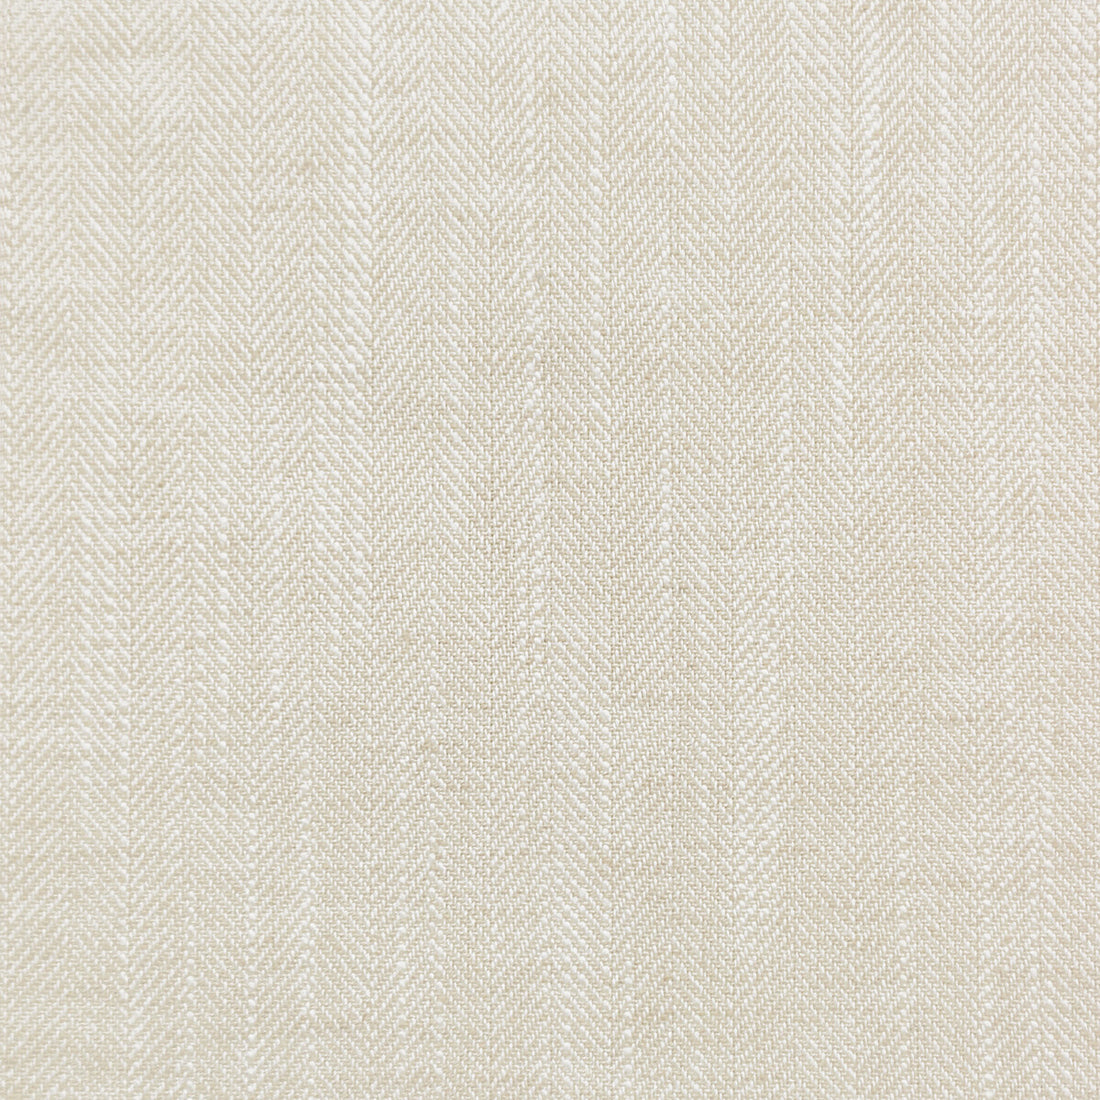 Mataru fabric in linen color - pattern 35763.116.0 - by Kravet Basics in the Ceylon collection